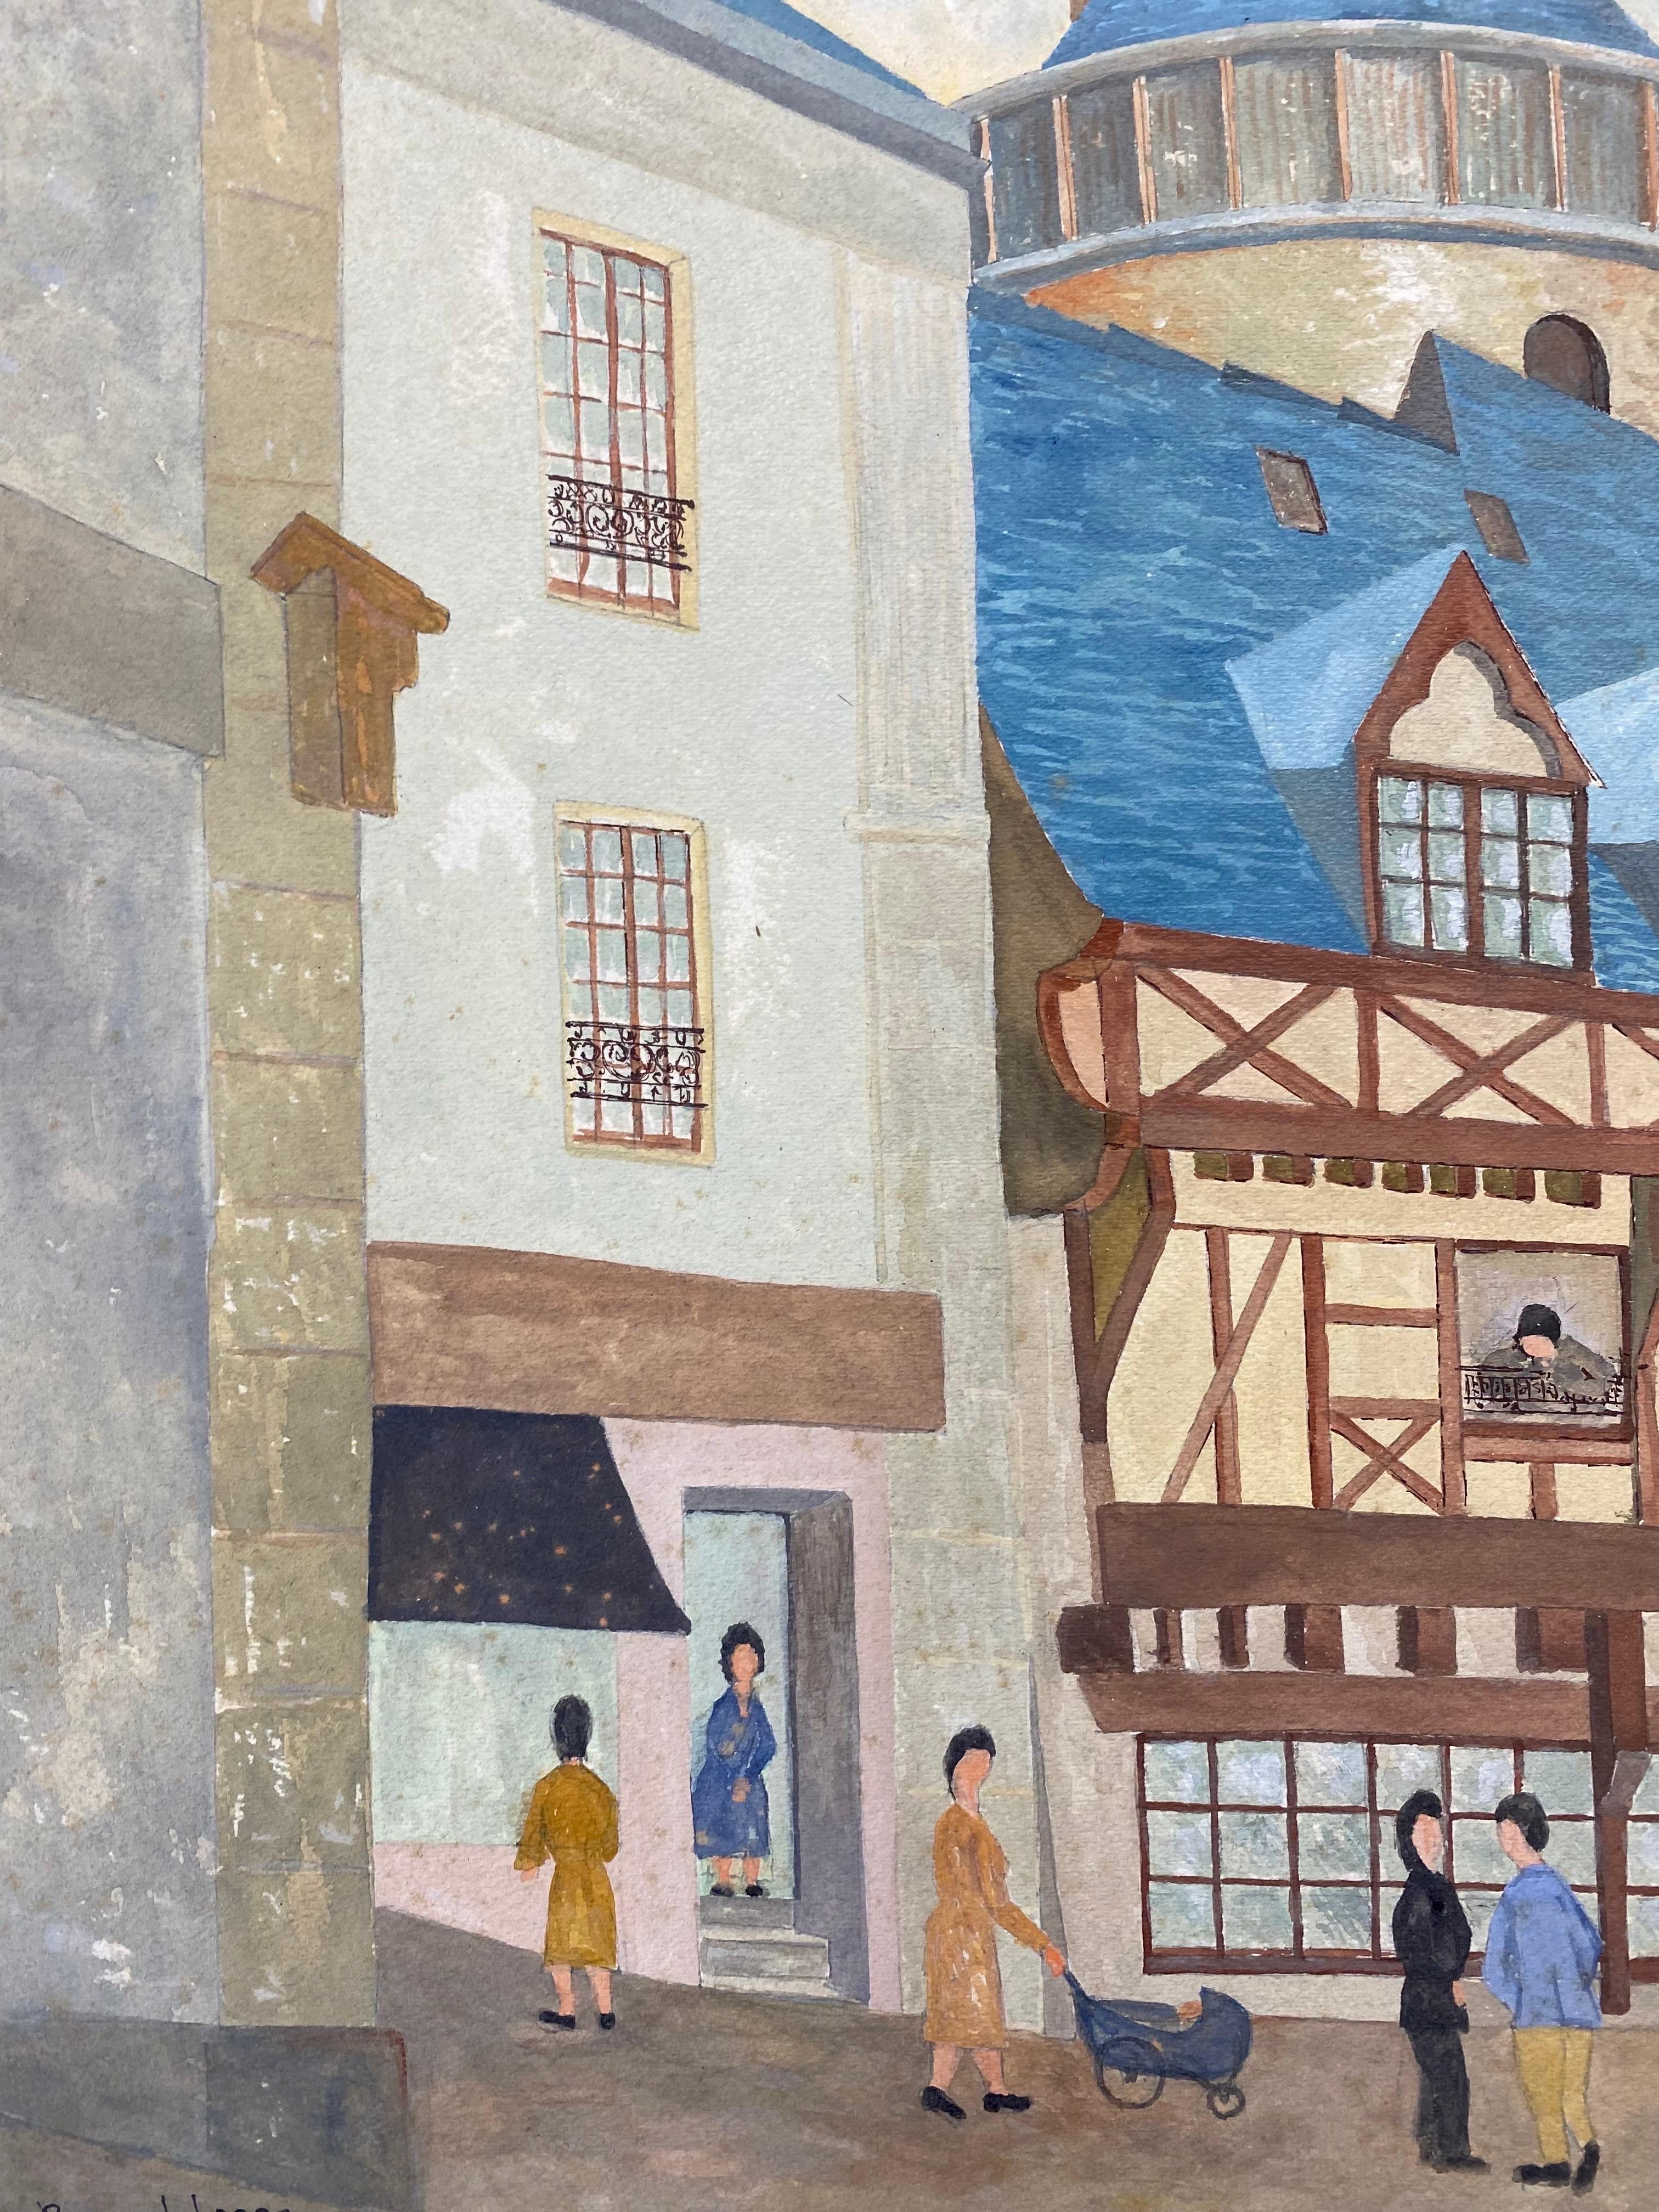 French buildings
by Bernard Labbe (French mid 20th century), signed, stamped verso
original watercolor/ gouache painting on paper , 
overall size: 19.75 x 16.5 inches
condition: very good and ready to be enjoyed. 

provenance: the artists